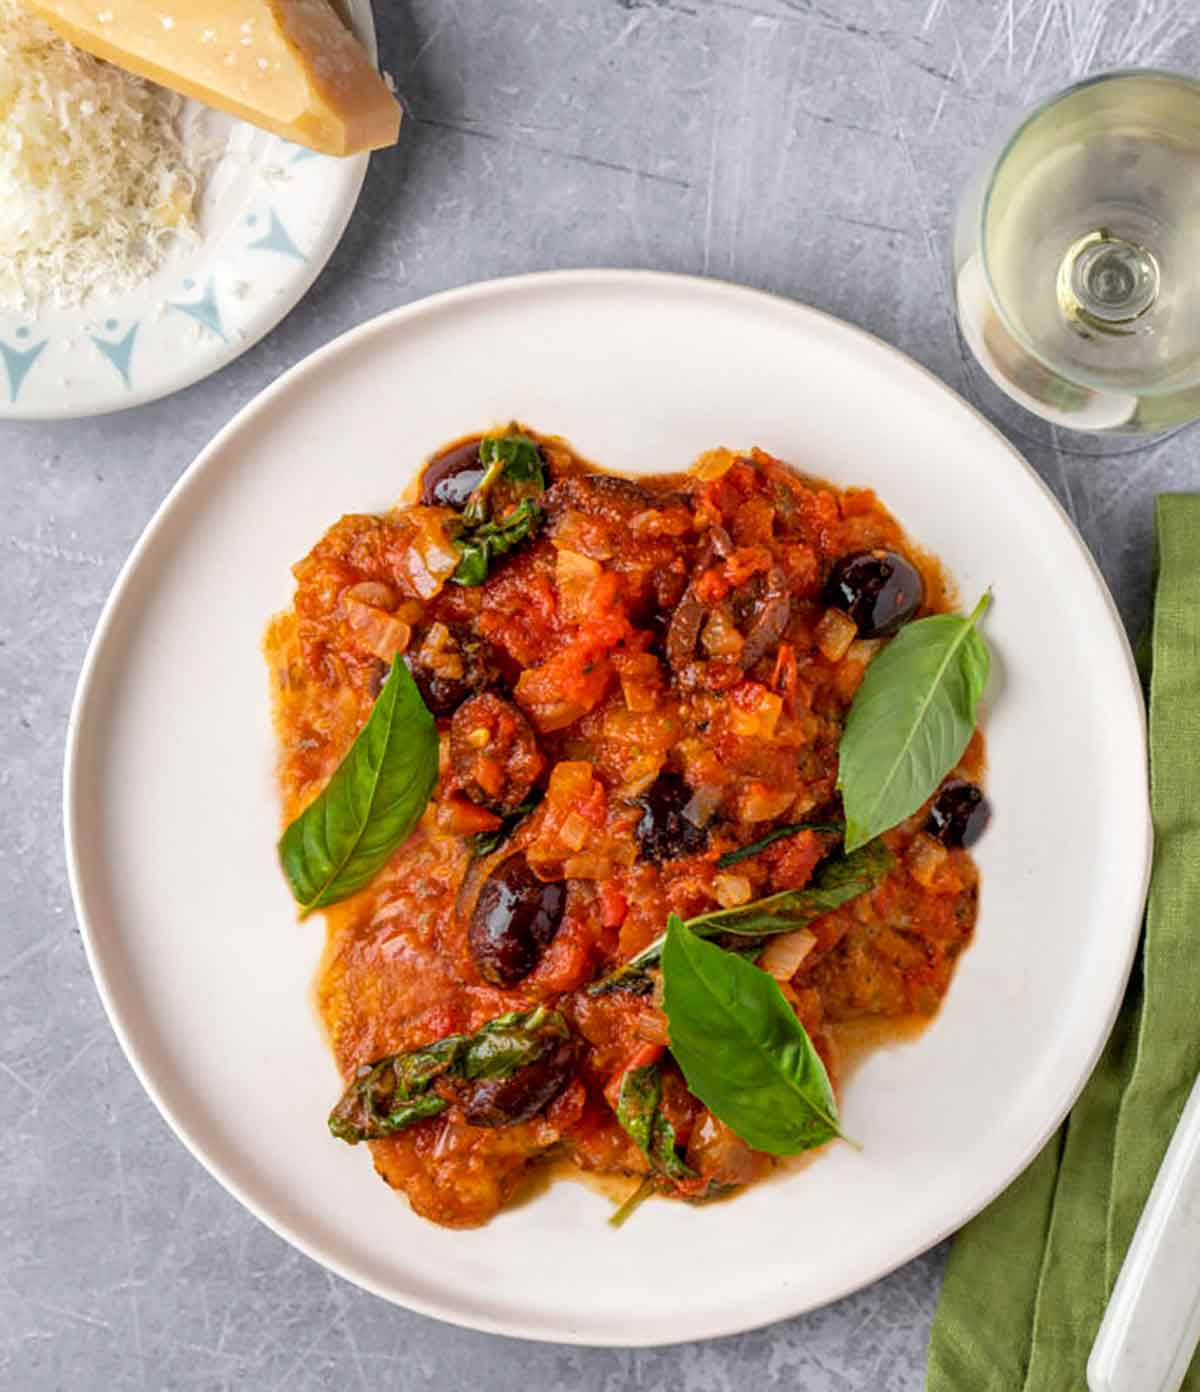 A plate of classic chicken cacciatore topped with basil leaves and a glass of wine on the side.